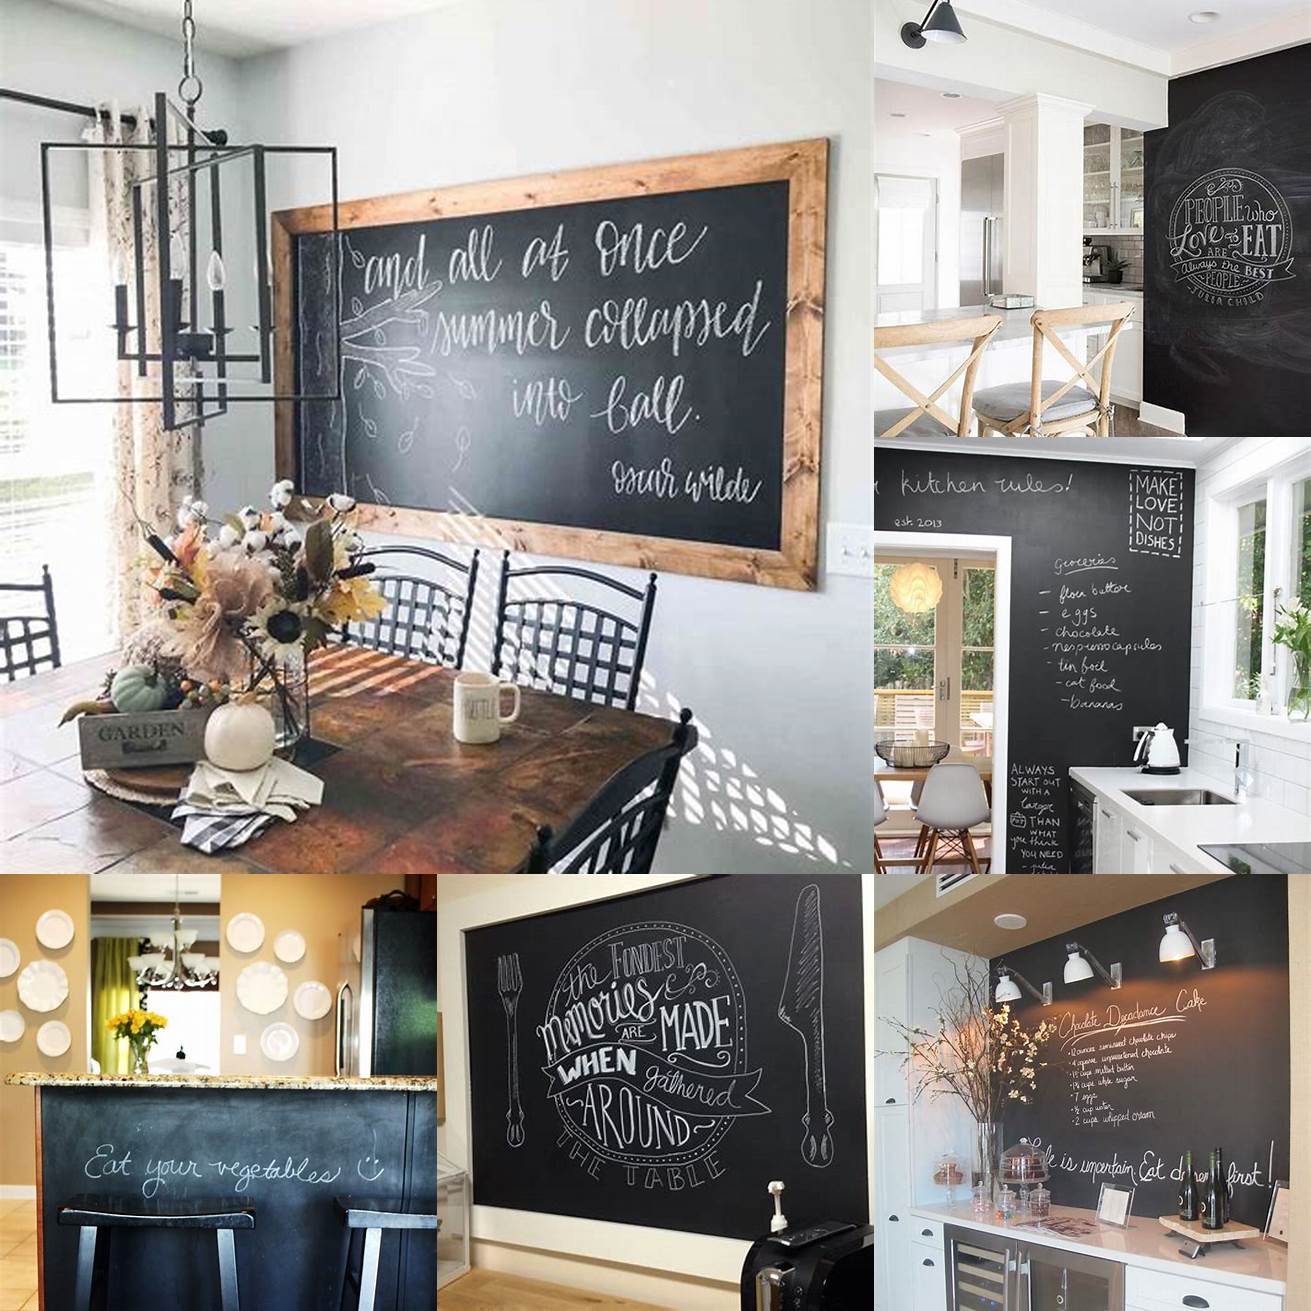 5 Décor Last but not least the kitchen chalkboard adds a rustic and charming touch to the décor of your kitchen It can be customized with different frames and designs to match your style